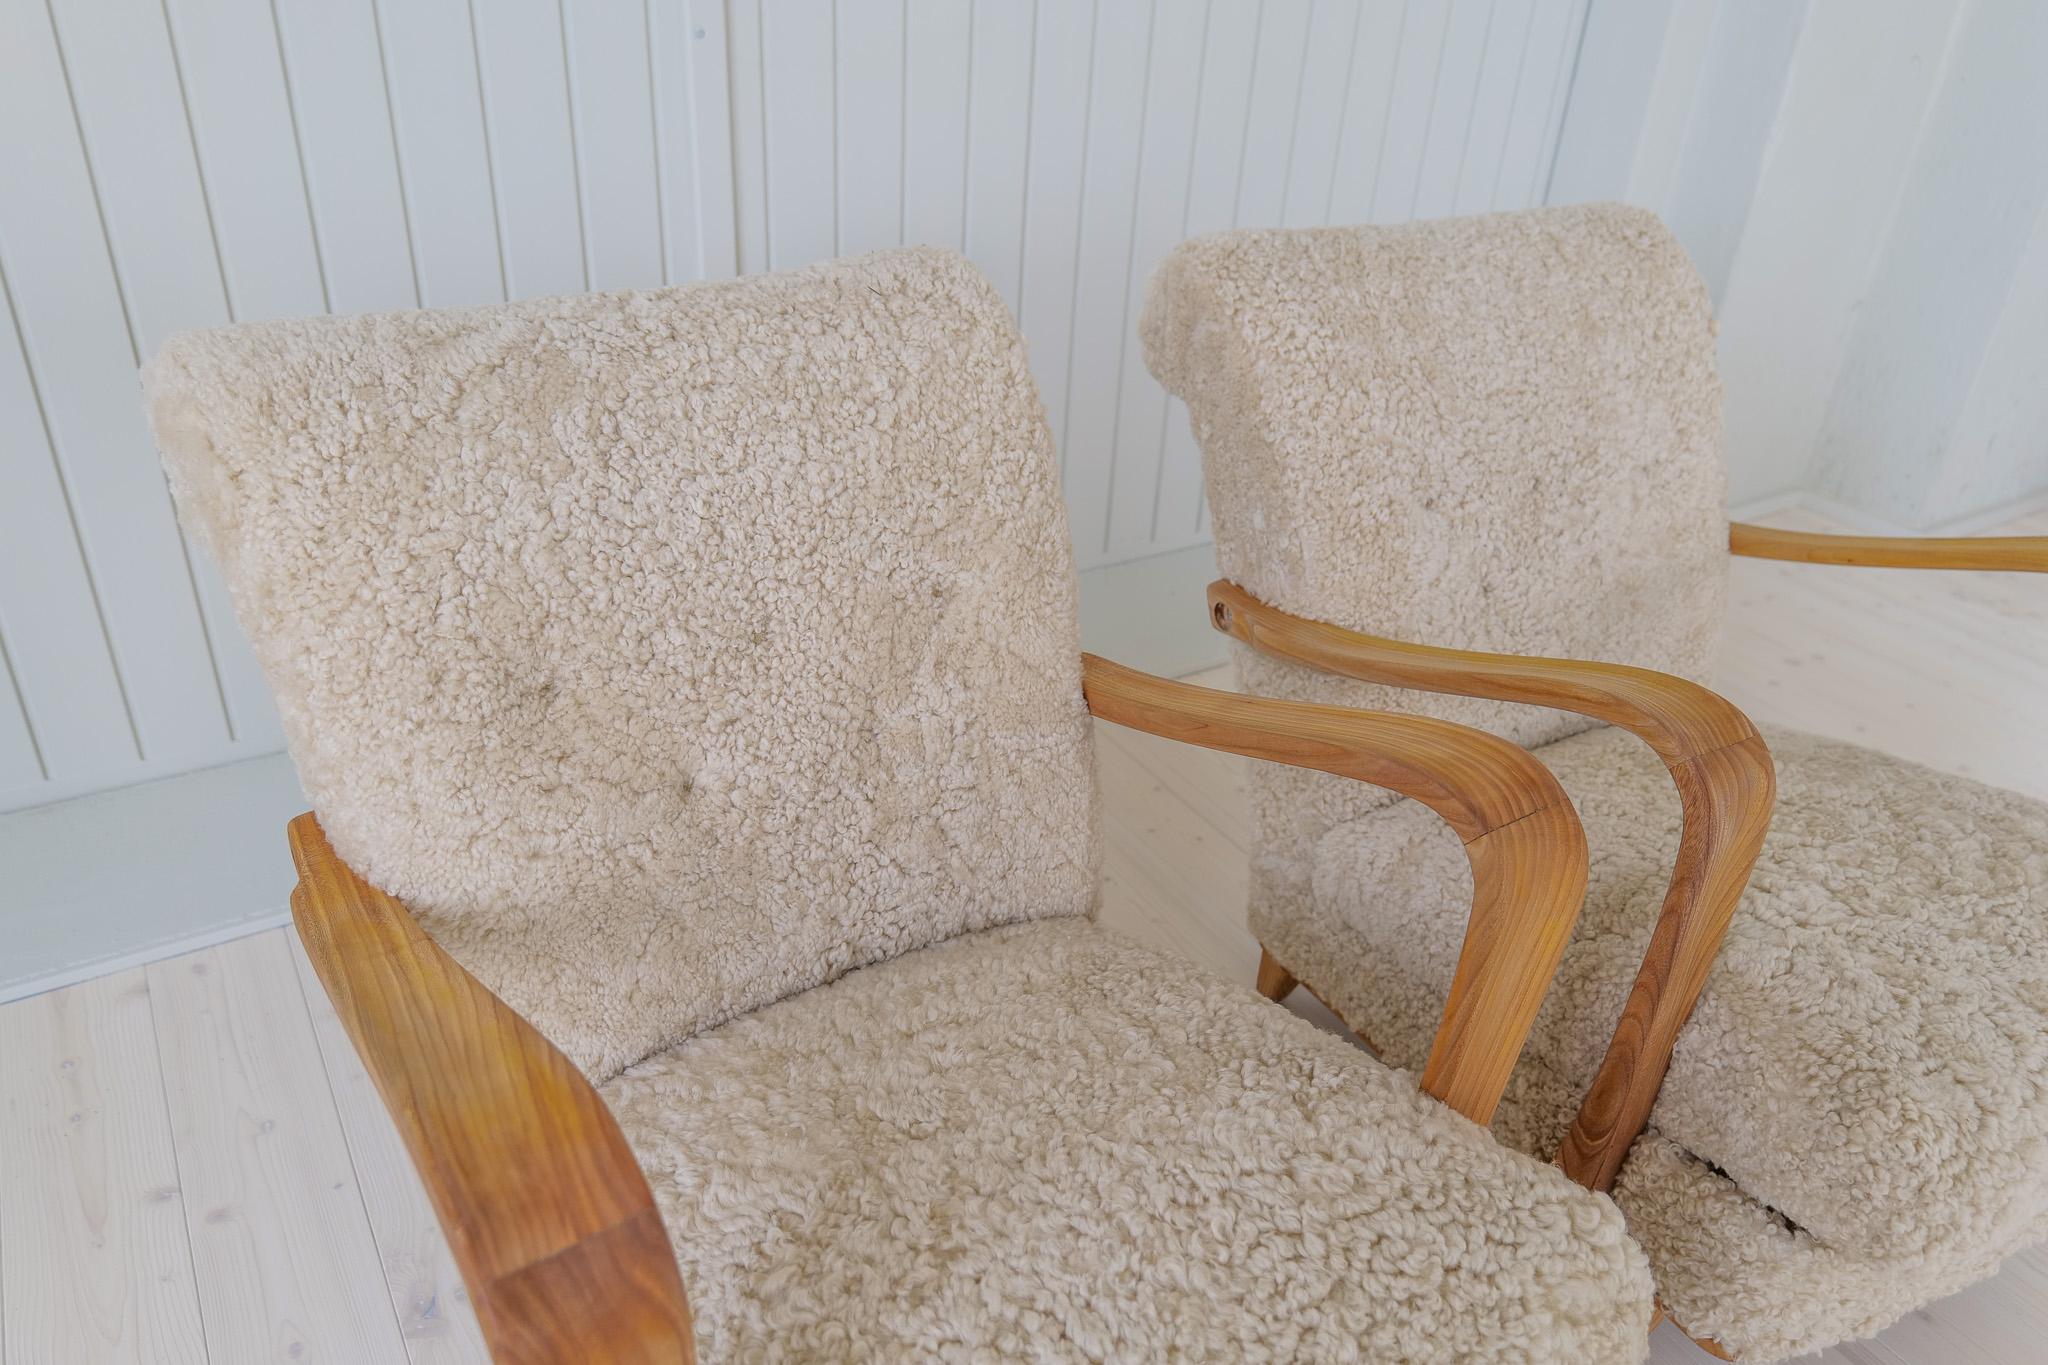 Swedish Modern Lounge Chairs in Shearling / Sheepskin and Elm, 1940s For Sale 3